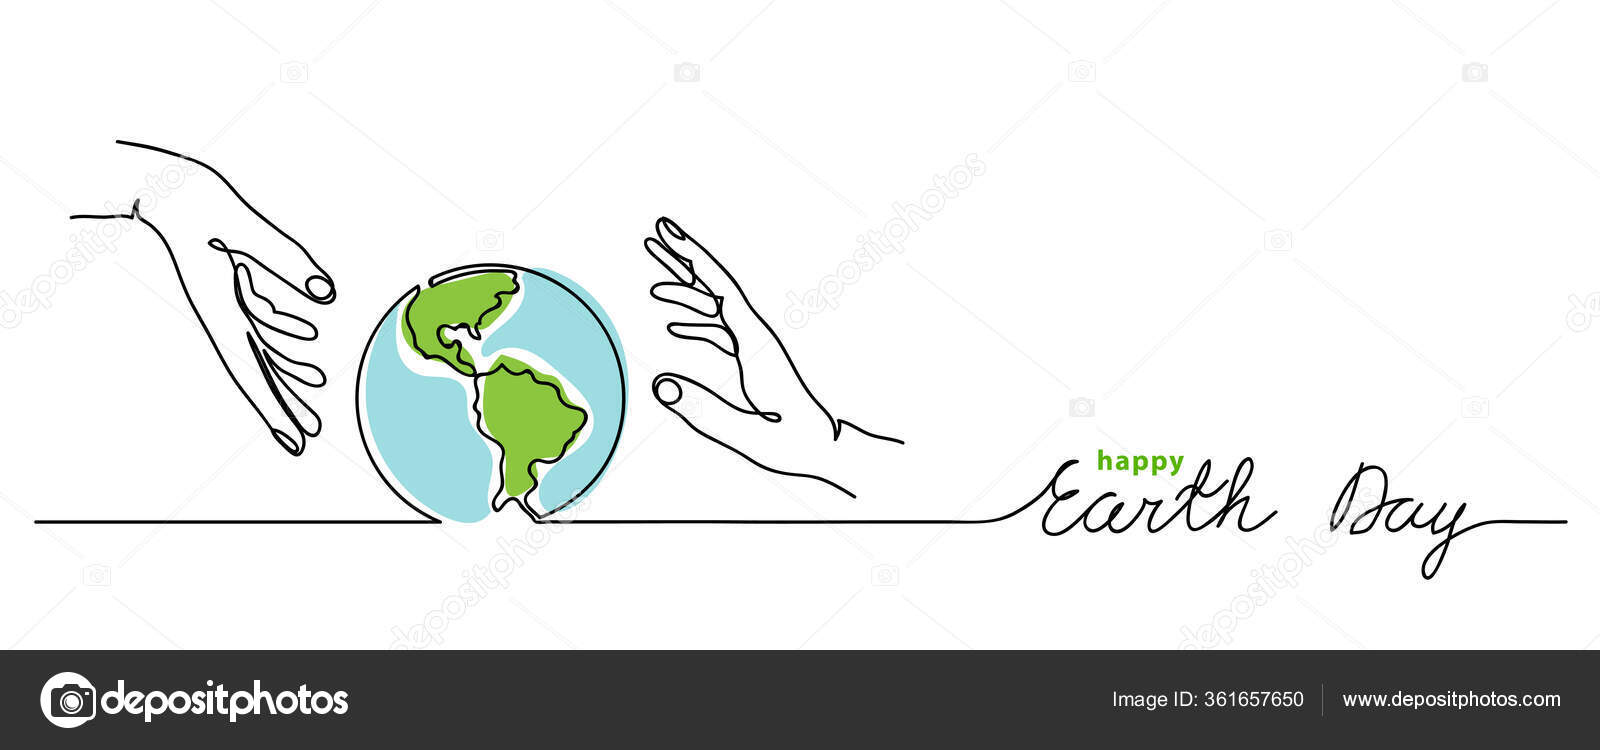 depositphotos 361657650 stock illustration happy earth day vector background